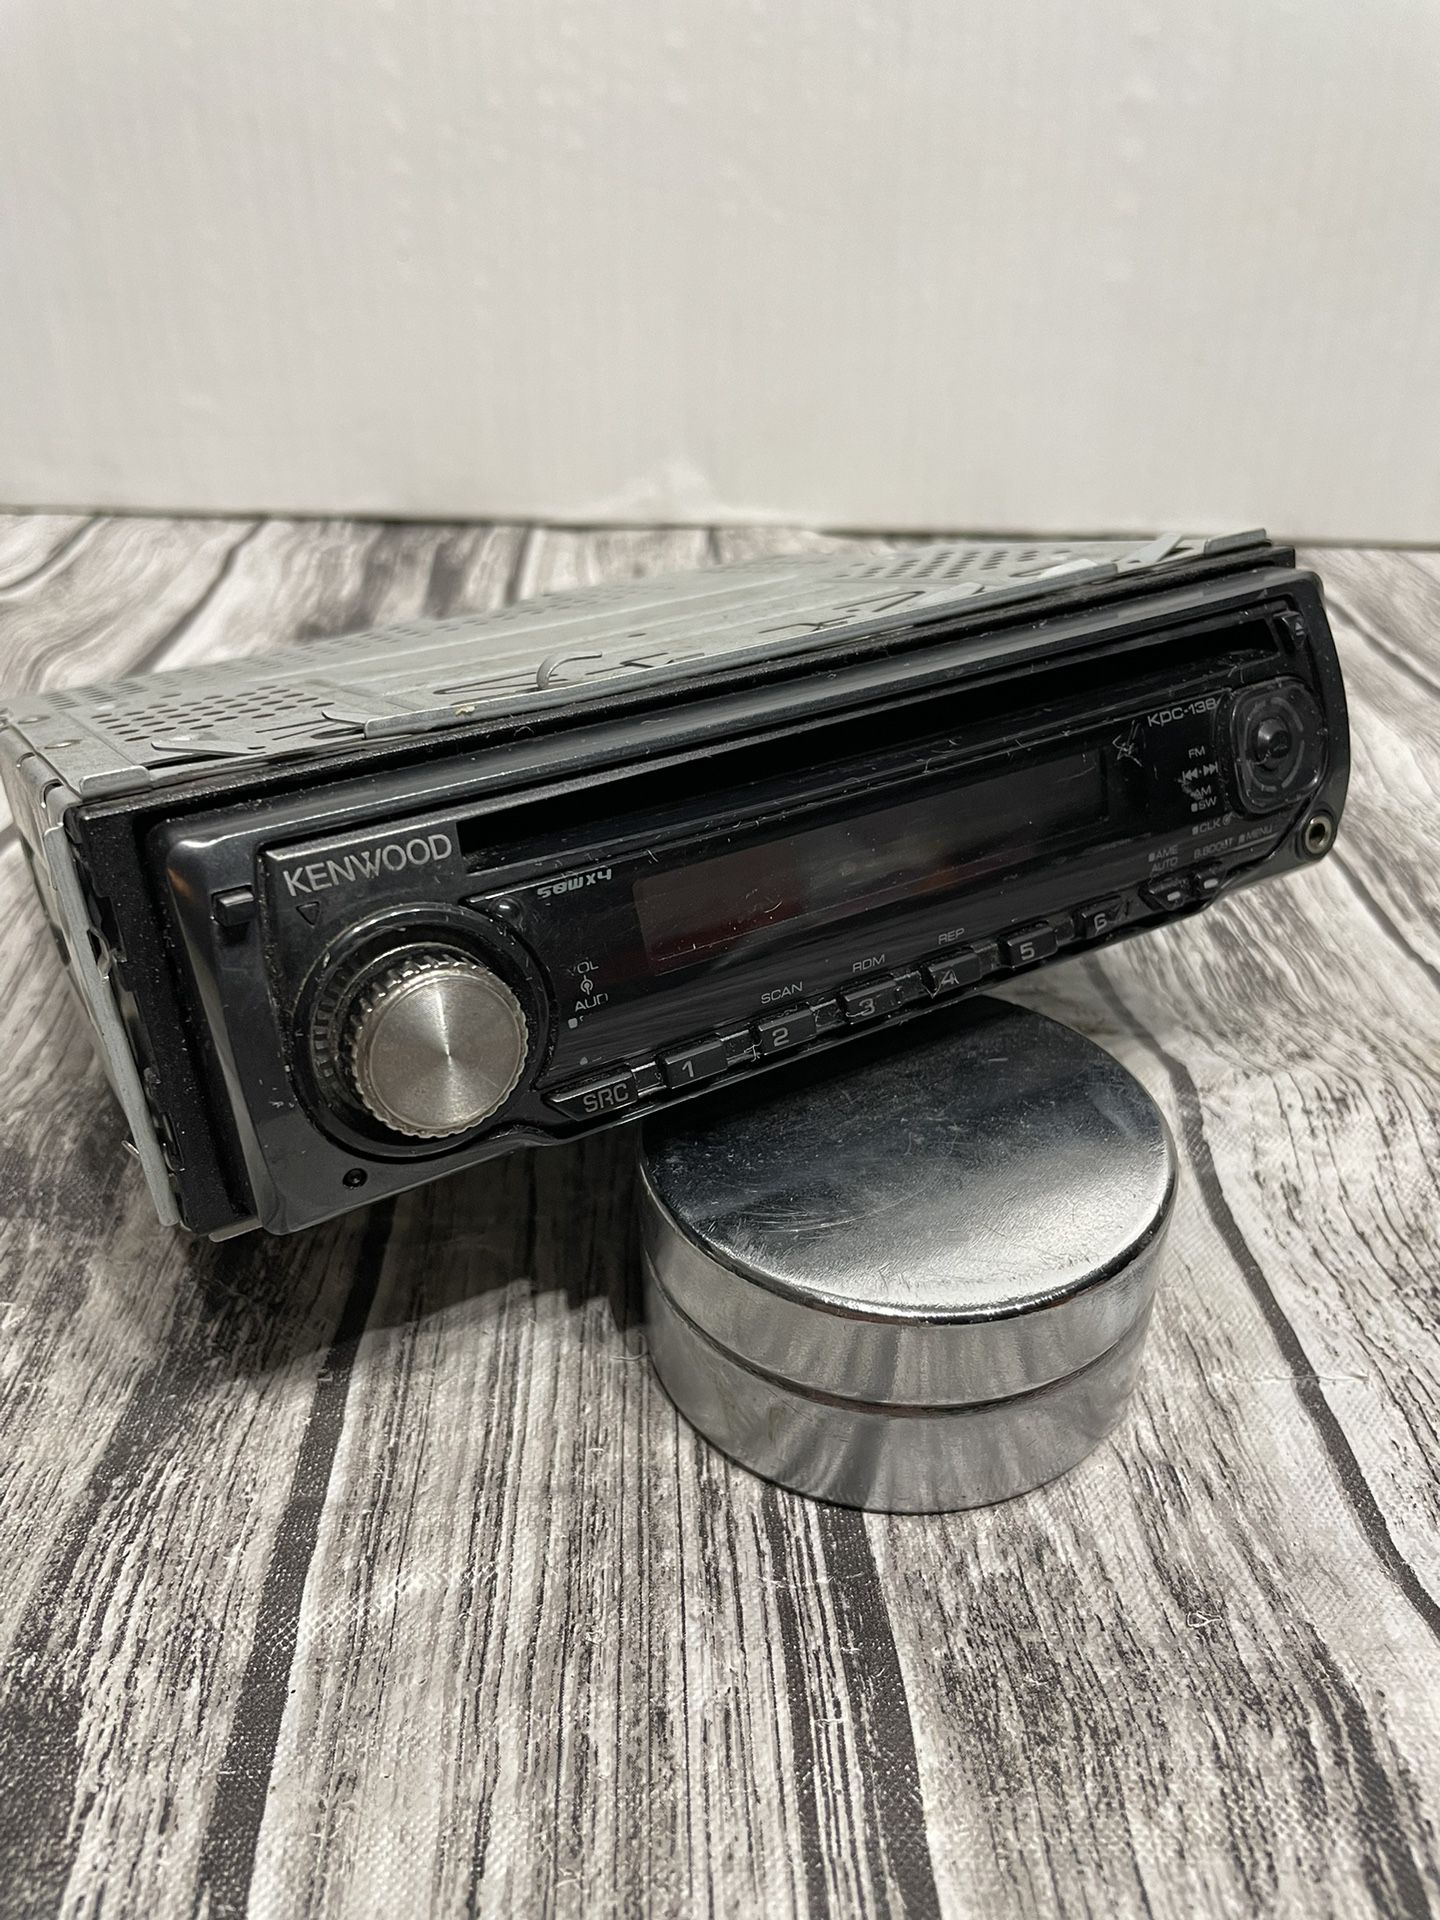 Kenwood 50WX4 car stereo receiver CD player *untested* but appears to be in good condition 